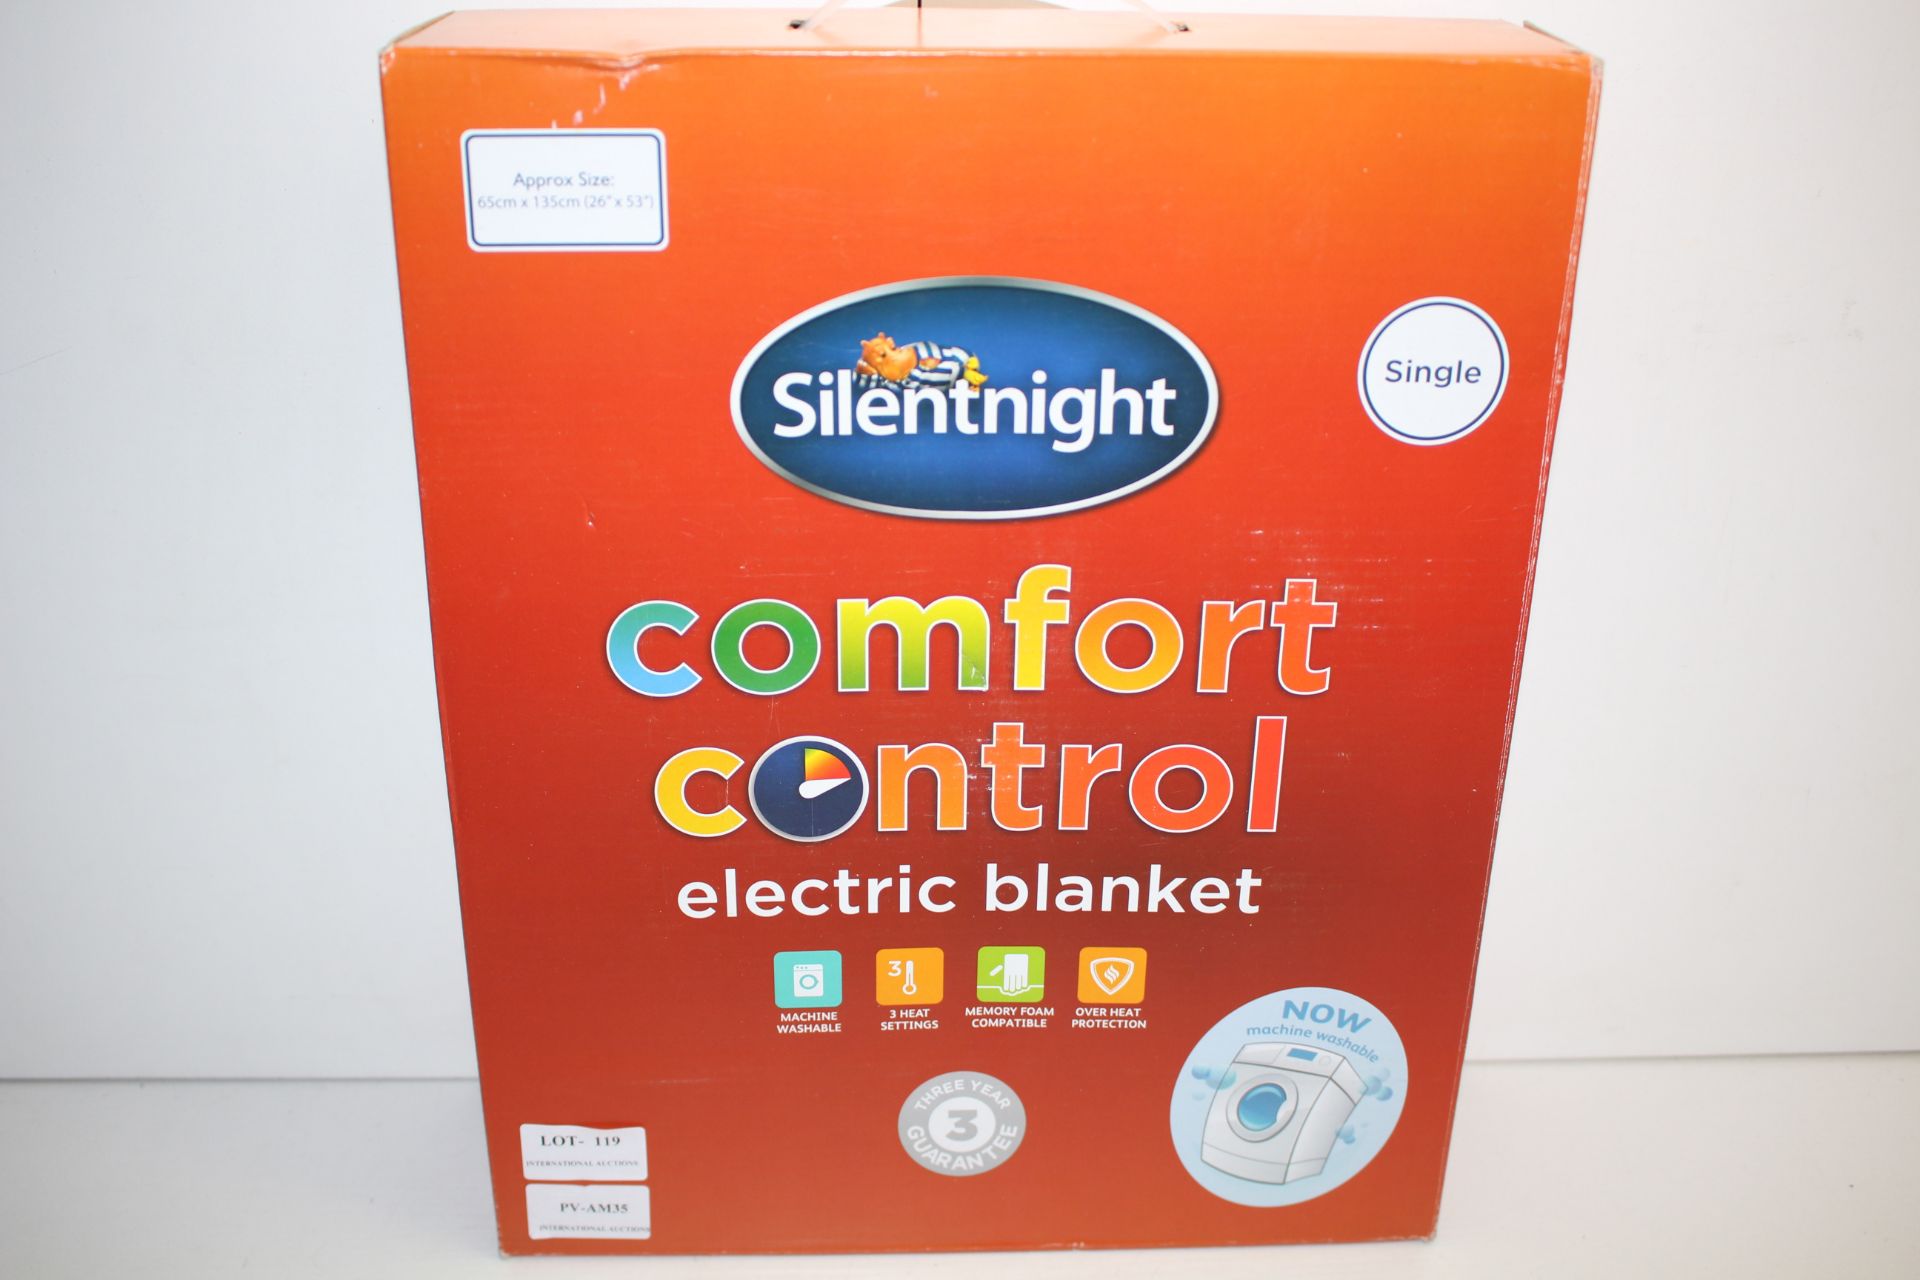 BOXED SILENTNIGHT COMFORT CONTROL ELECTRIC BLANKET SINGLE RRP £29.95Condition ReportAppraisal